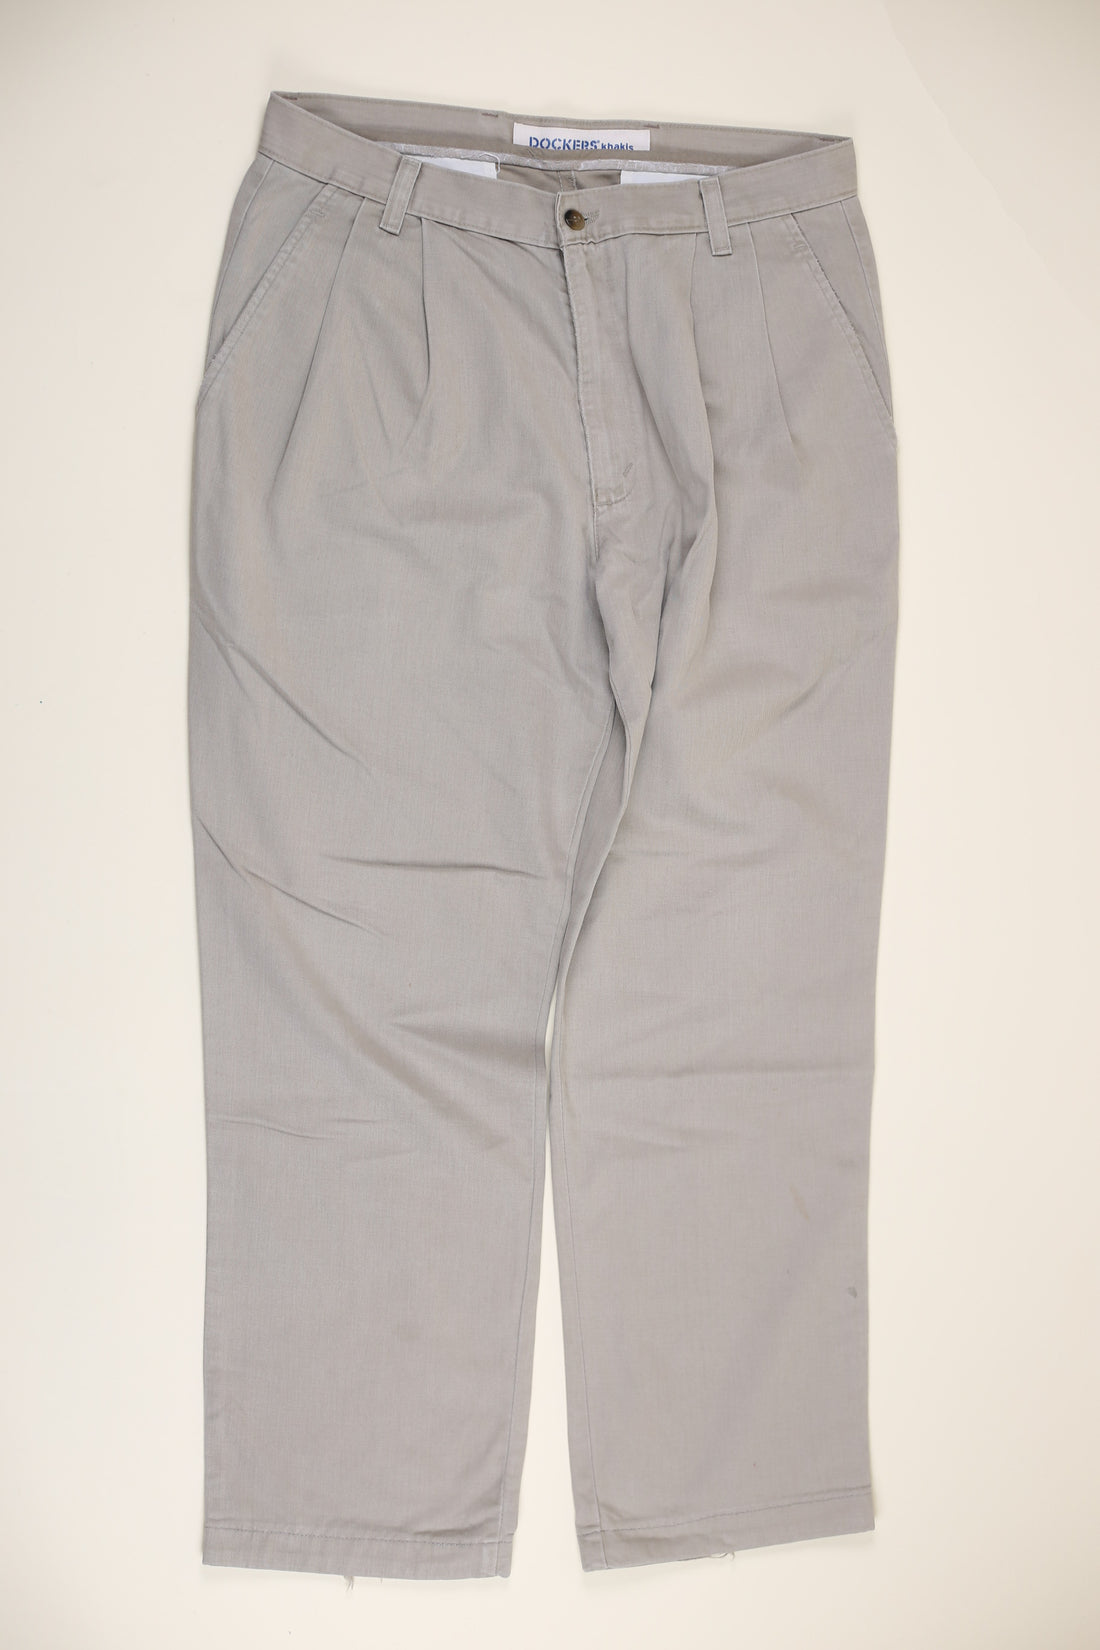 Chino  con pence  vintage  DOCKERS   - W33 -